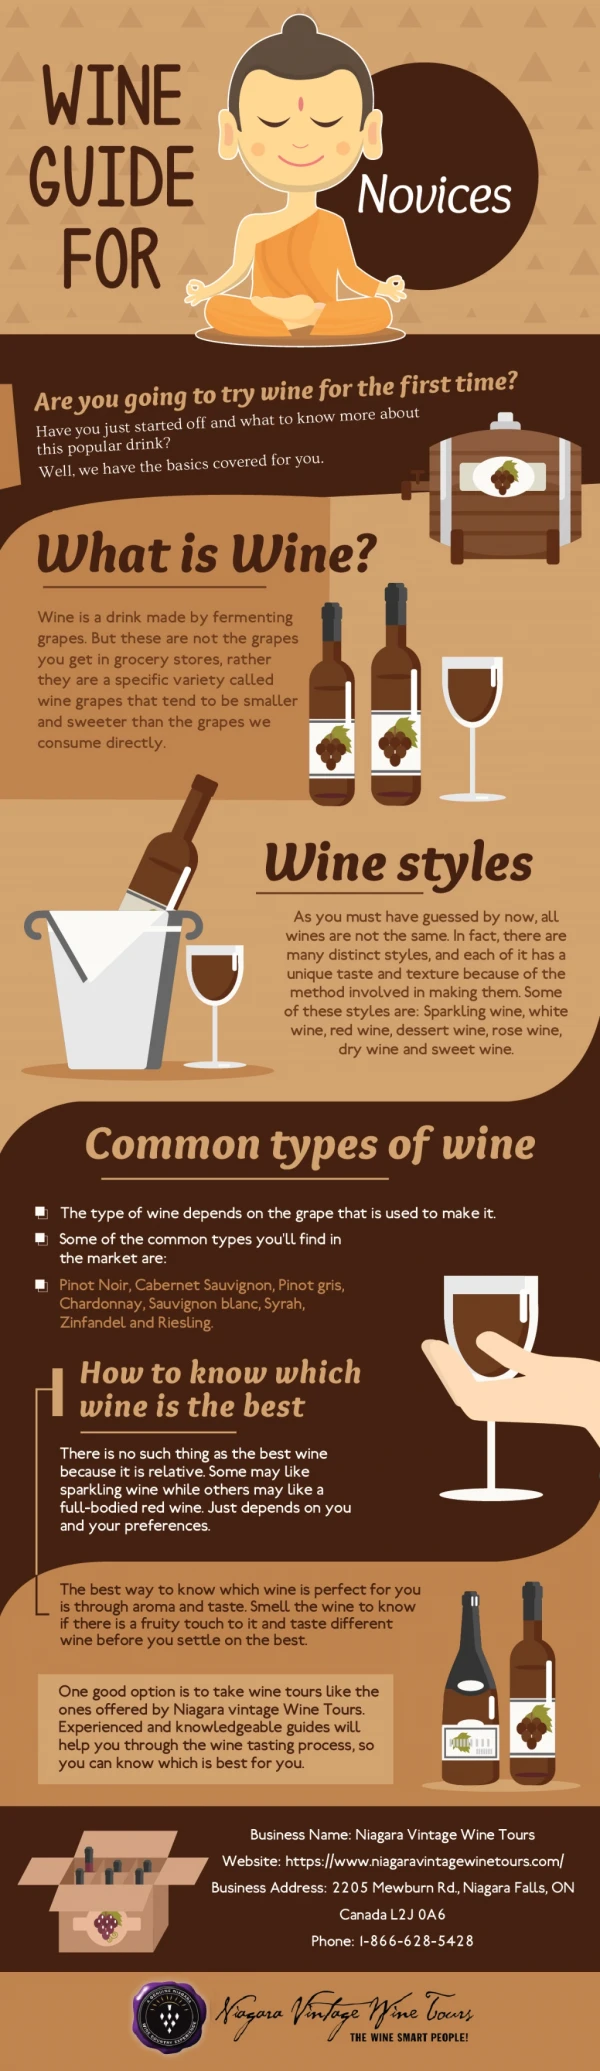 Wine guide for novices